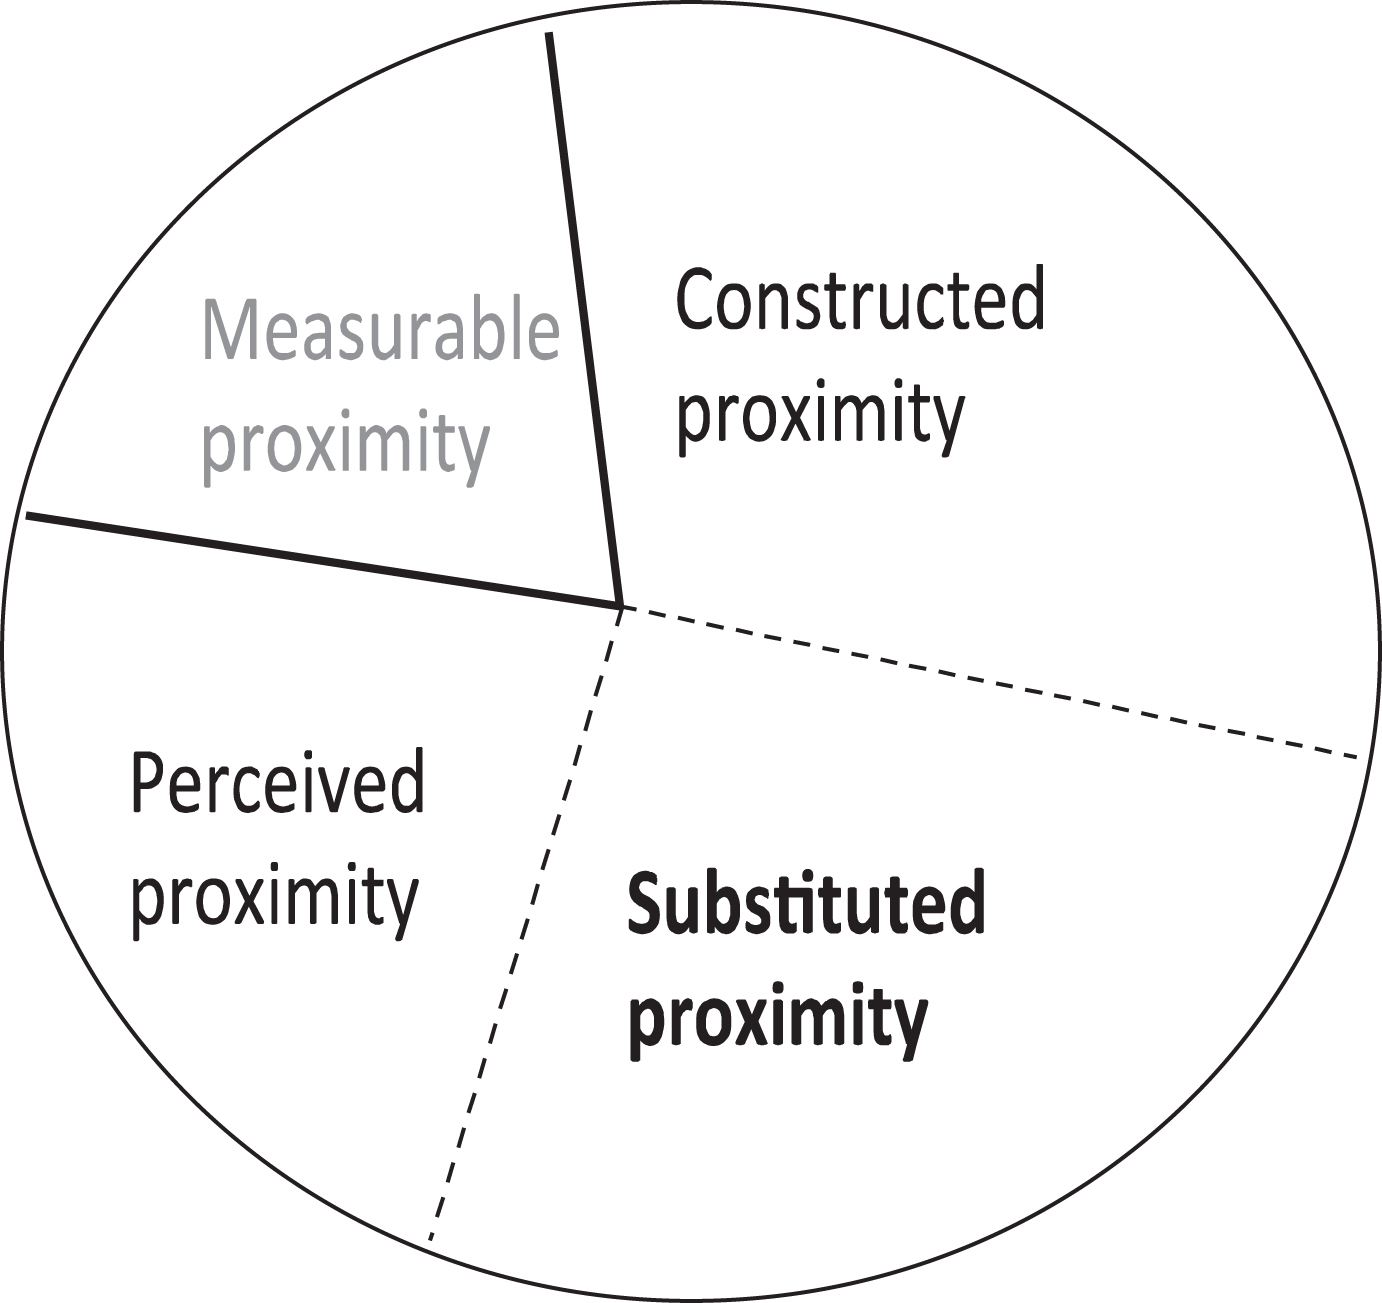 A possible configuration of organizational proximity in the context of digitalization.